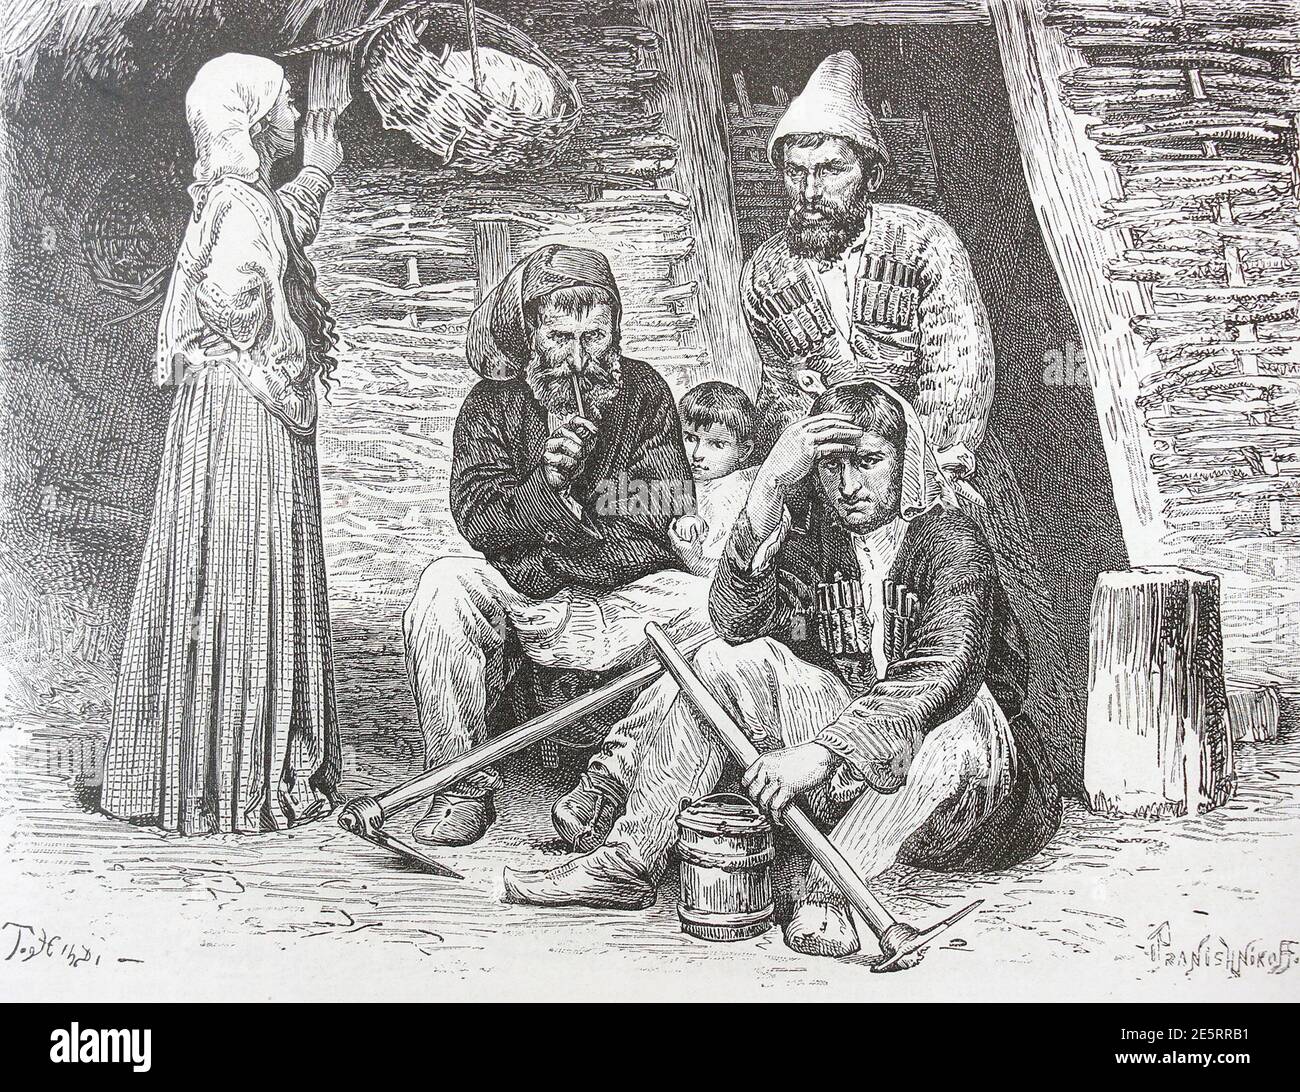 Chapar family from the village of Bedia. Engraving of 1882. Stock Photo